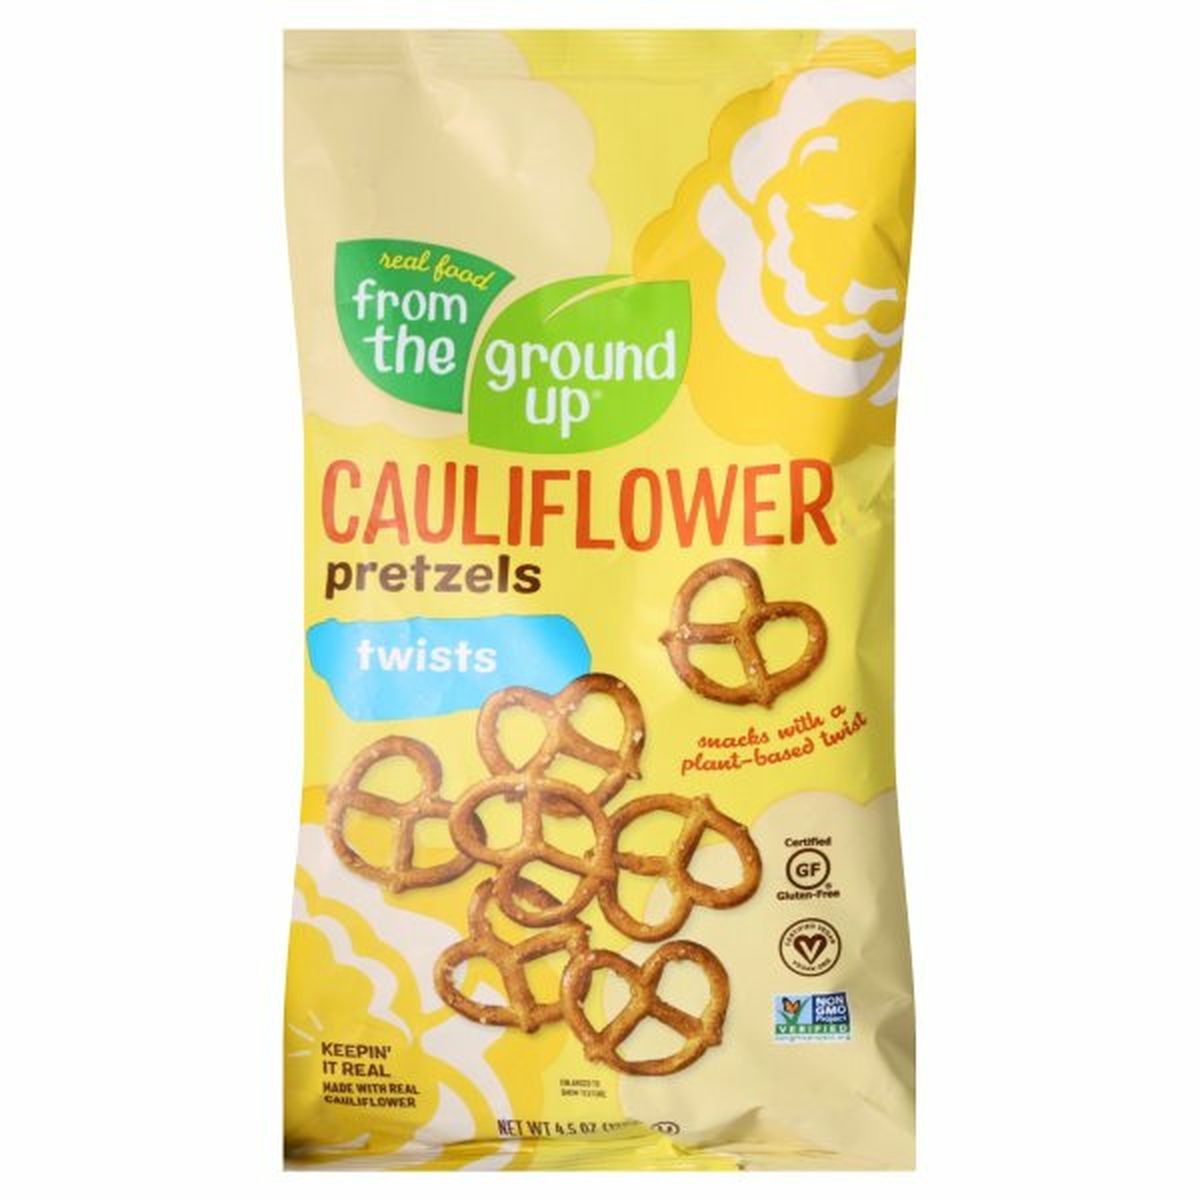 Calories in From the Ground Up Pretzels, Cauliflower, Twists